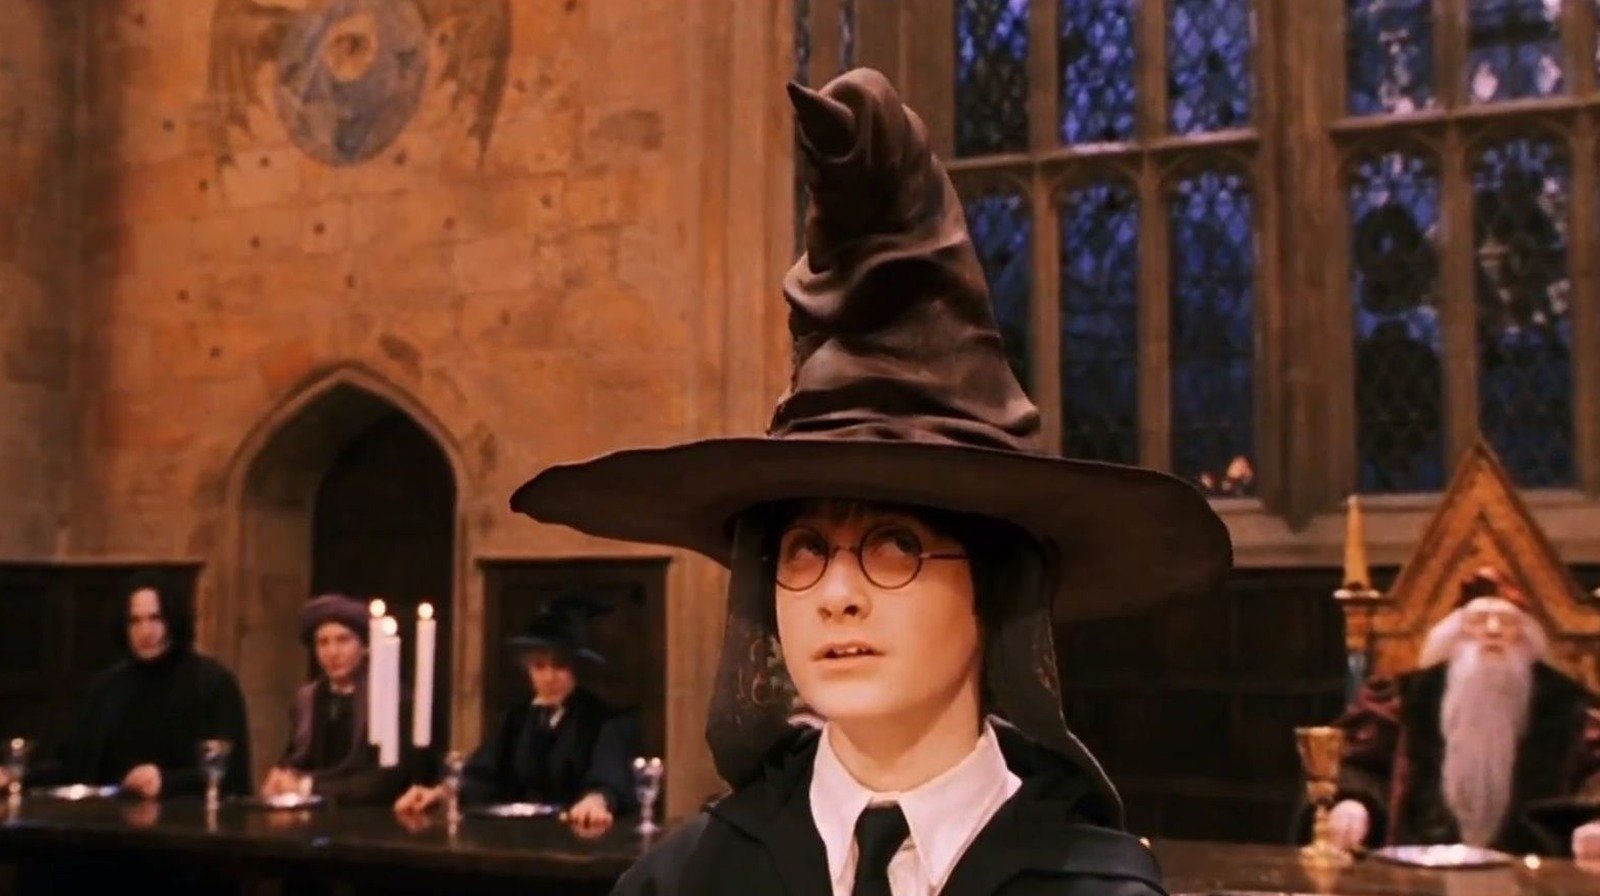 Chris Columbus Wants To Release His Three-Hour #PeevesCut Of Harry Potter And The Sorcerer's Stone - /Film